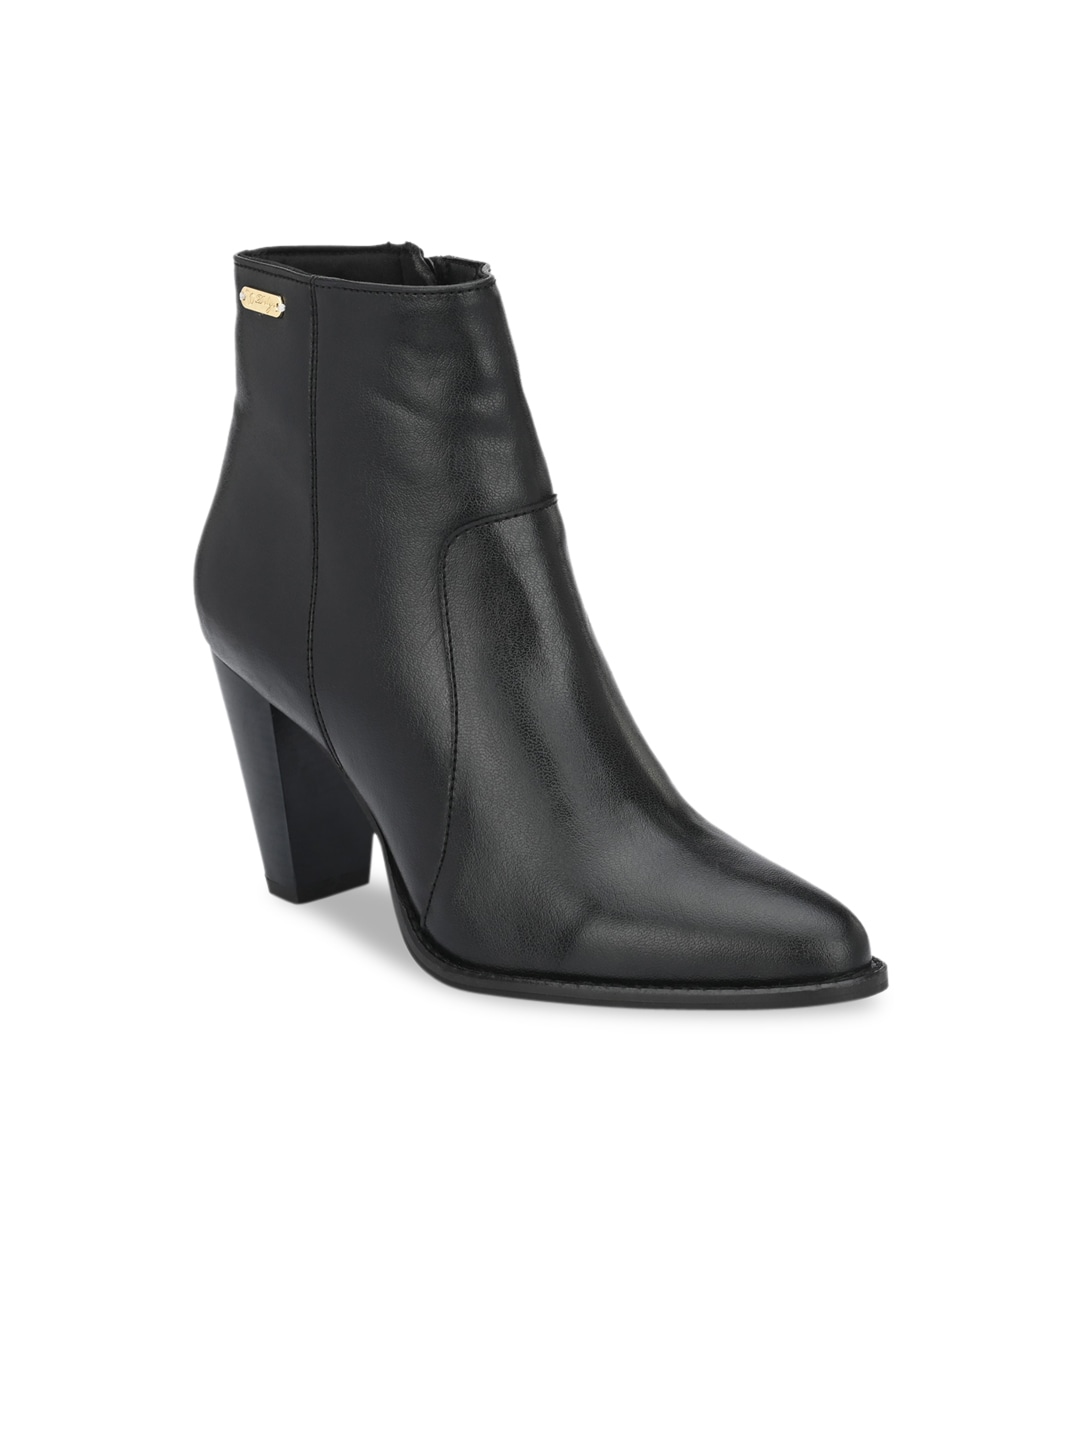 Delize Black Party Block Heeled Boots Price in India